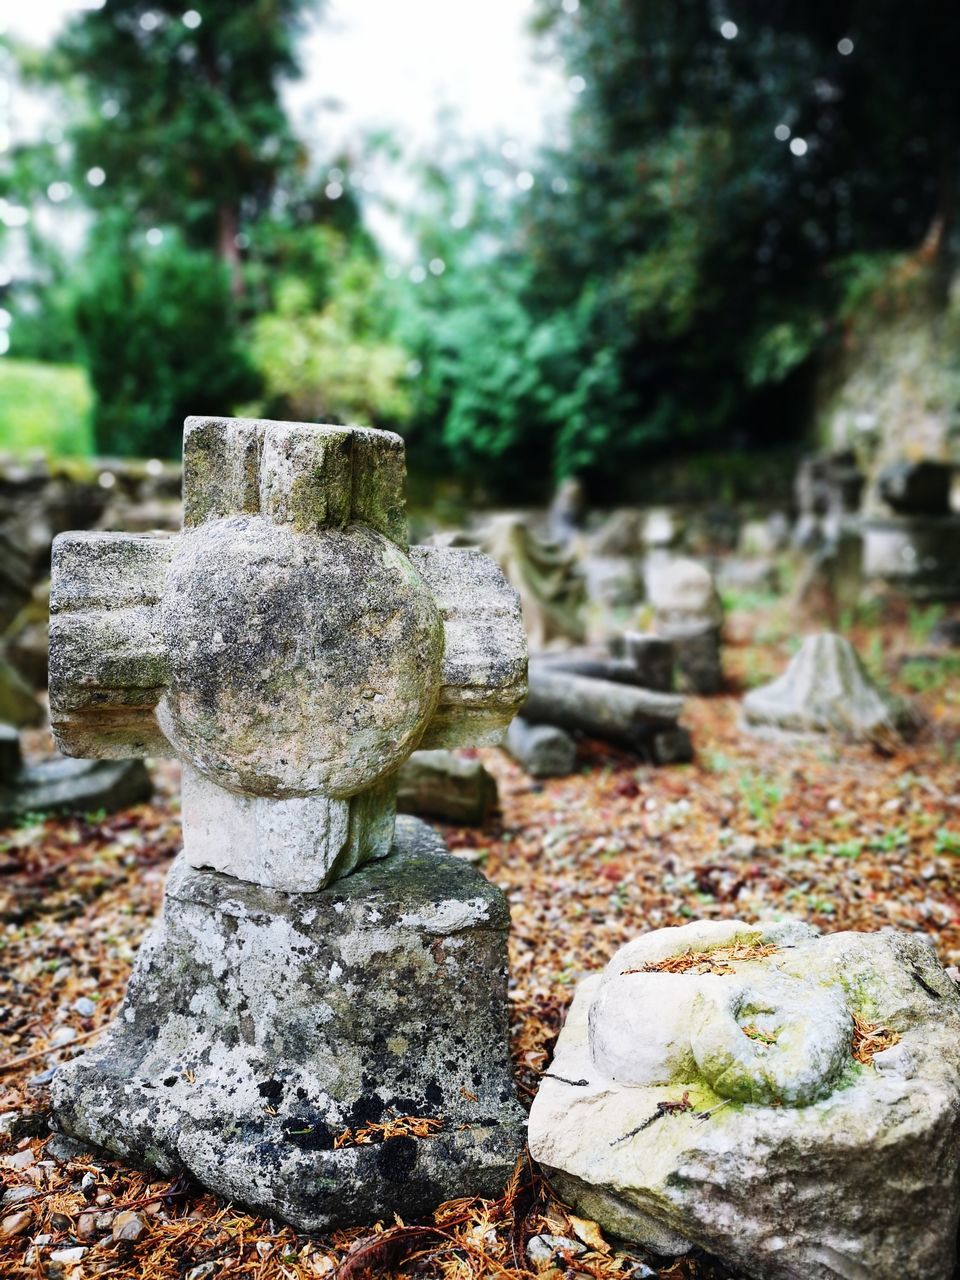 day, stone, solid, no people, focus on foreground, nature, plant, close-up, stone material, grave, tree, cemetery, outdoors, old, tombstone, tranquility, rock, religion, art and craft, spirituality